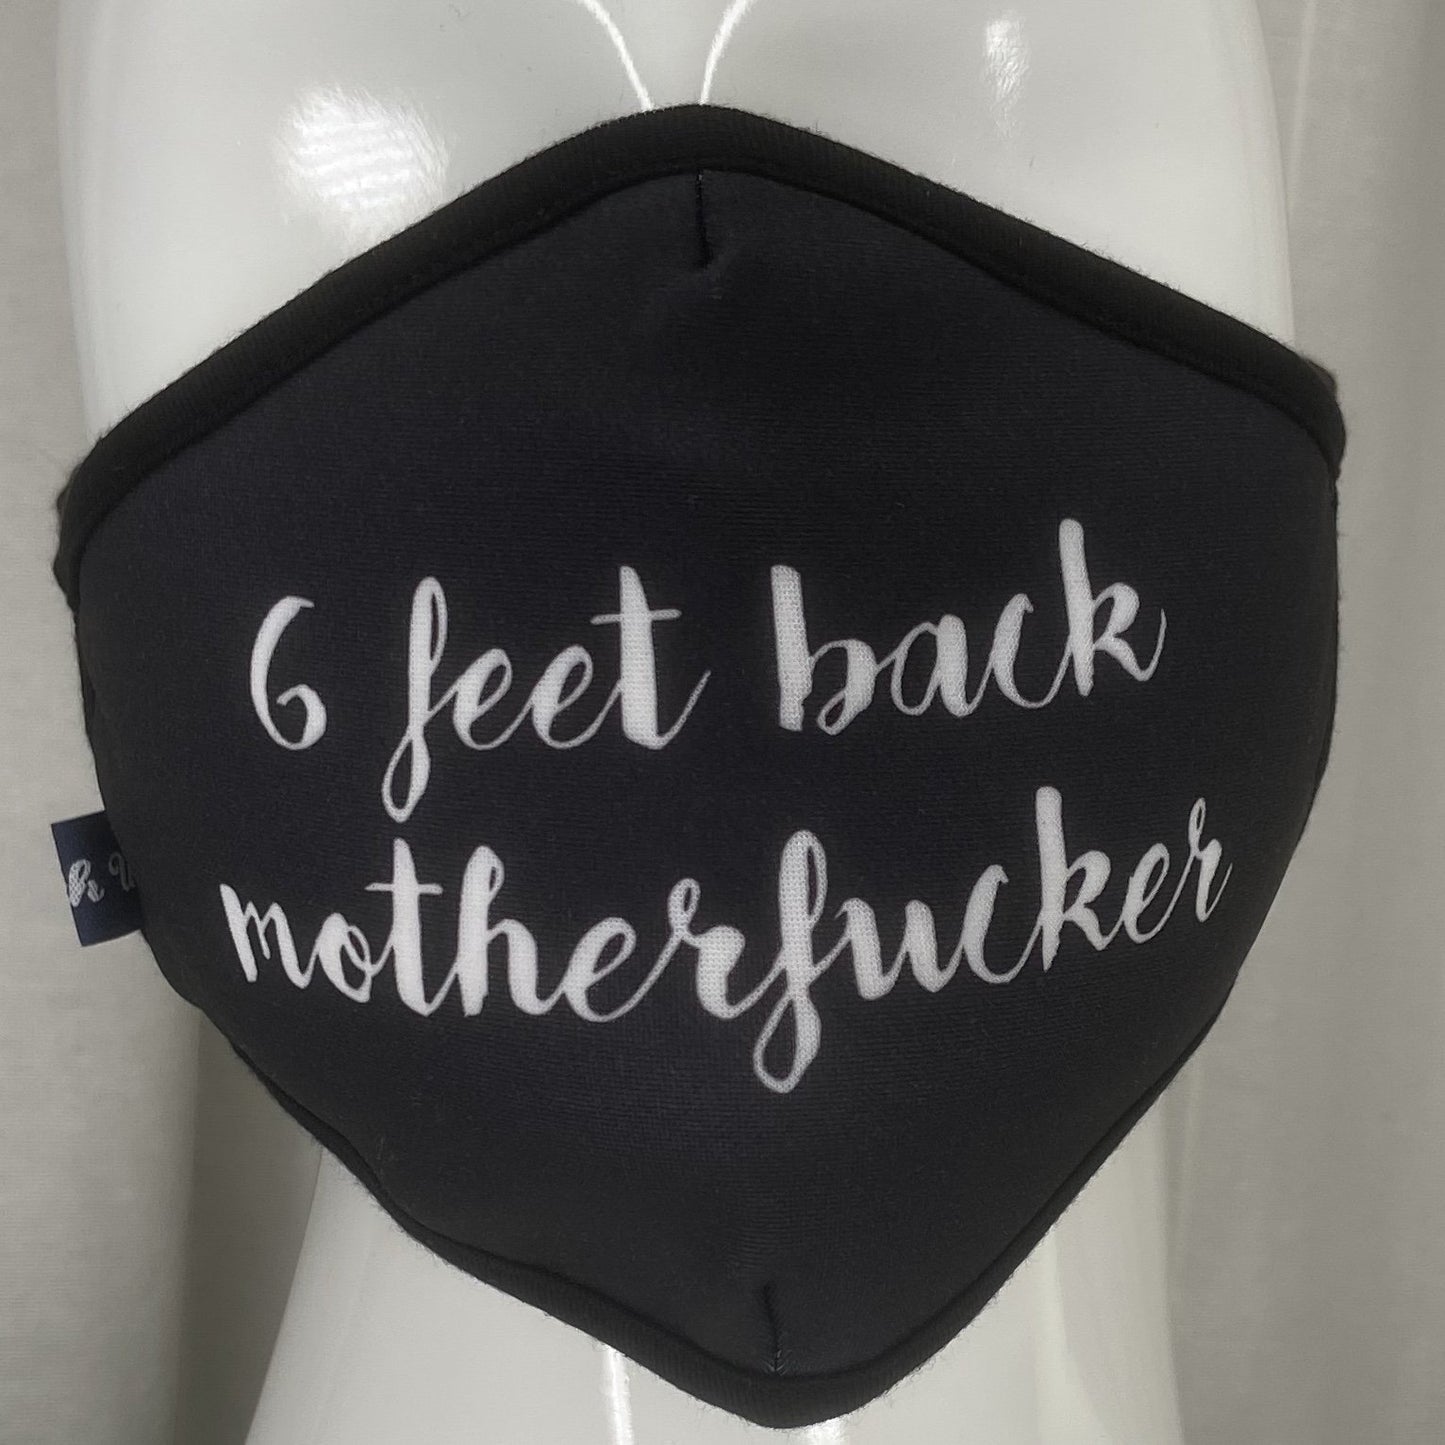 Fashion Mask 6Ft Back Mf (Black) In Stock-Boughie Curves-Boughie